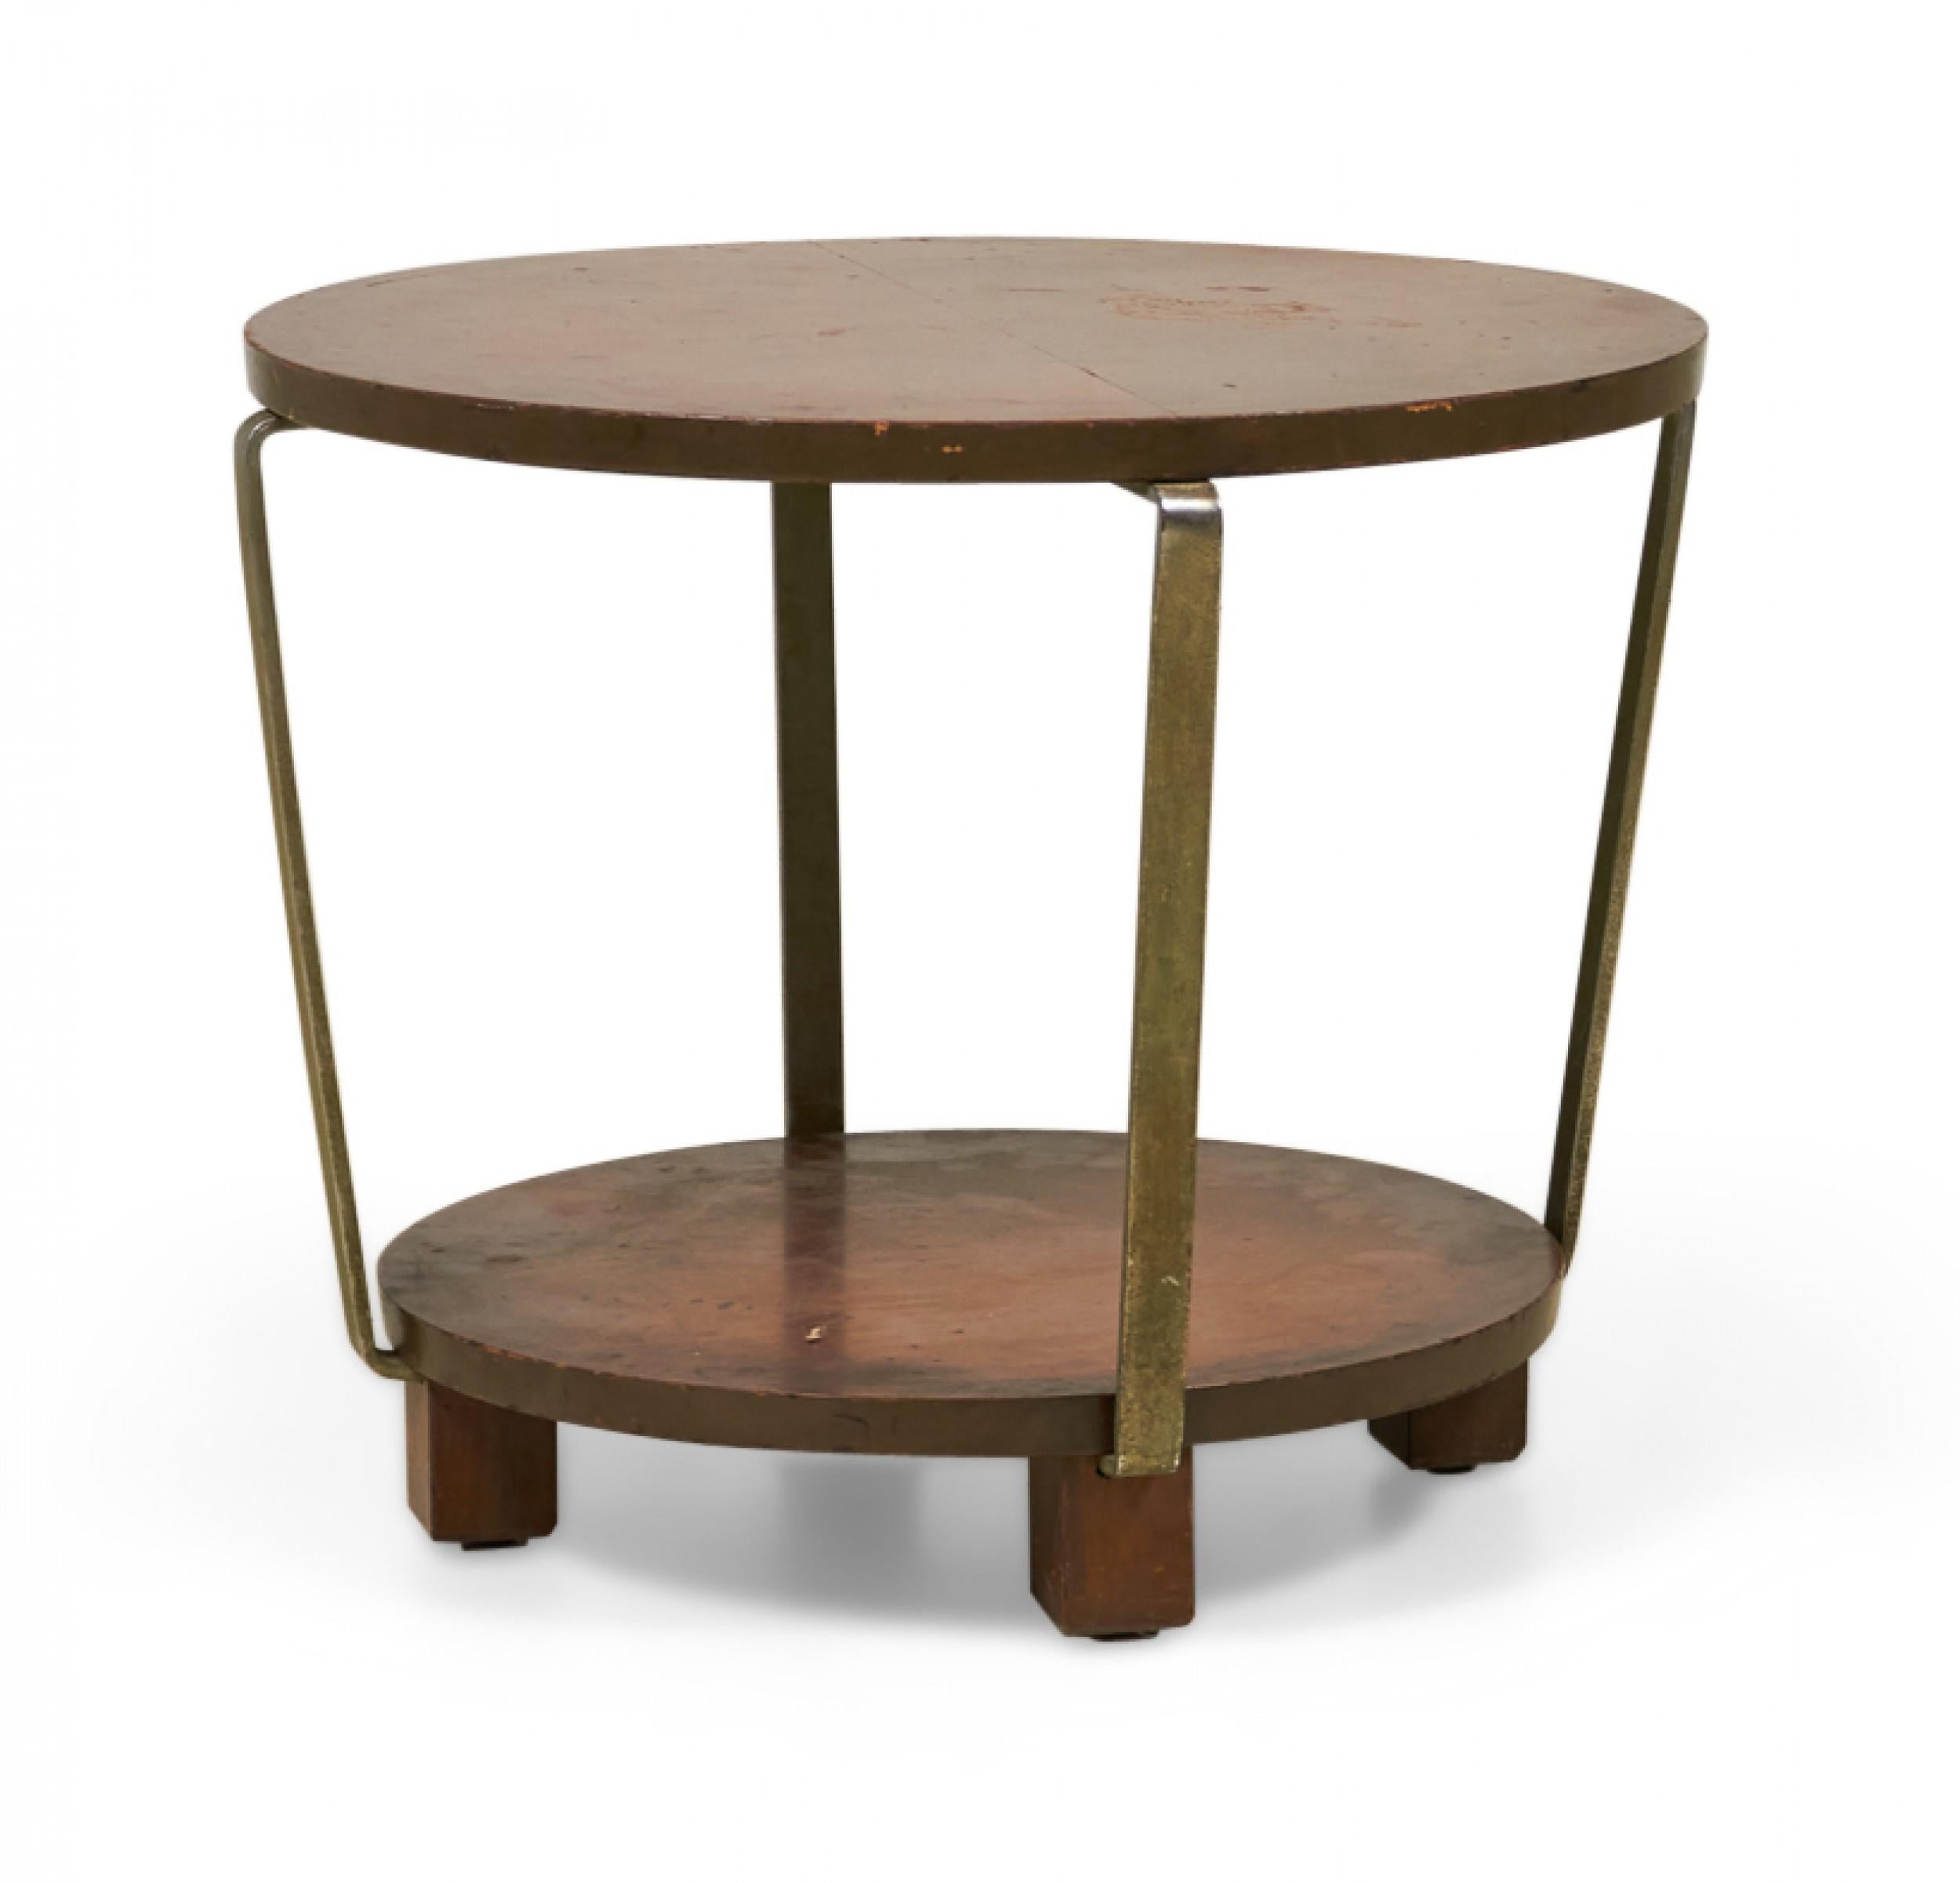 American Art Deco Circular Walnut and Brass Occasional / Side Table For Sale 3